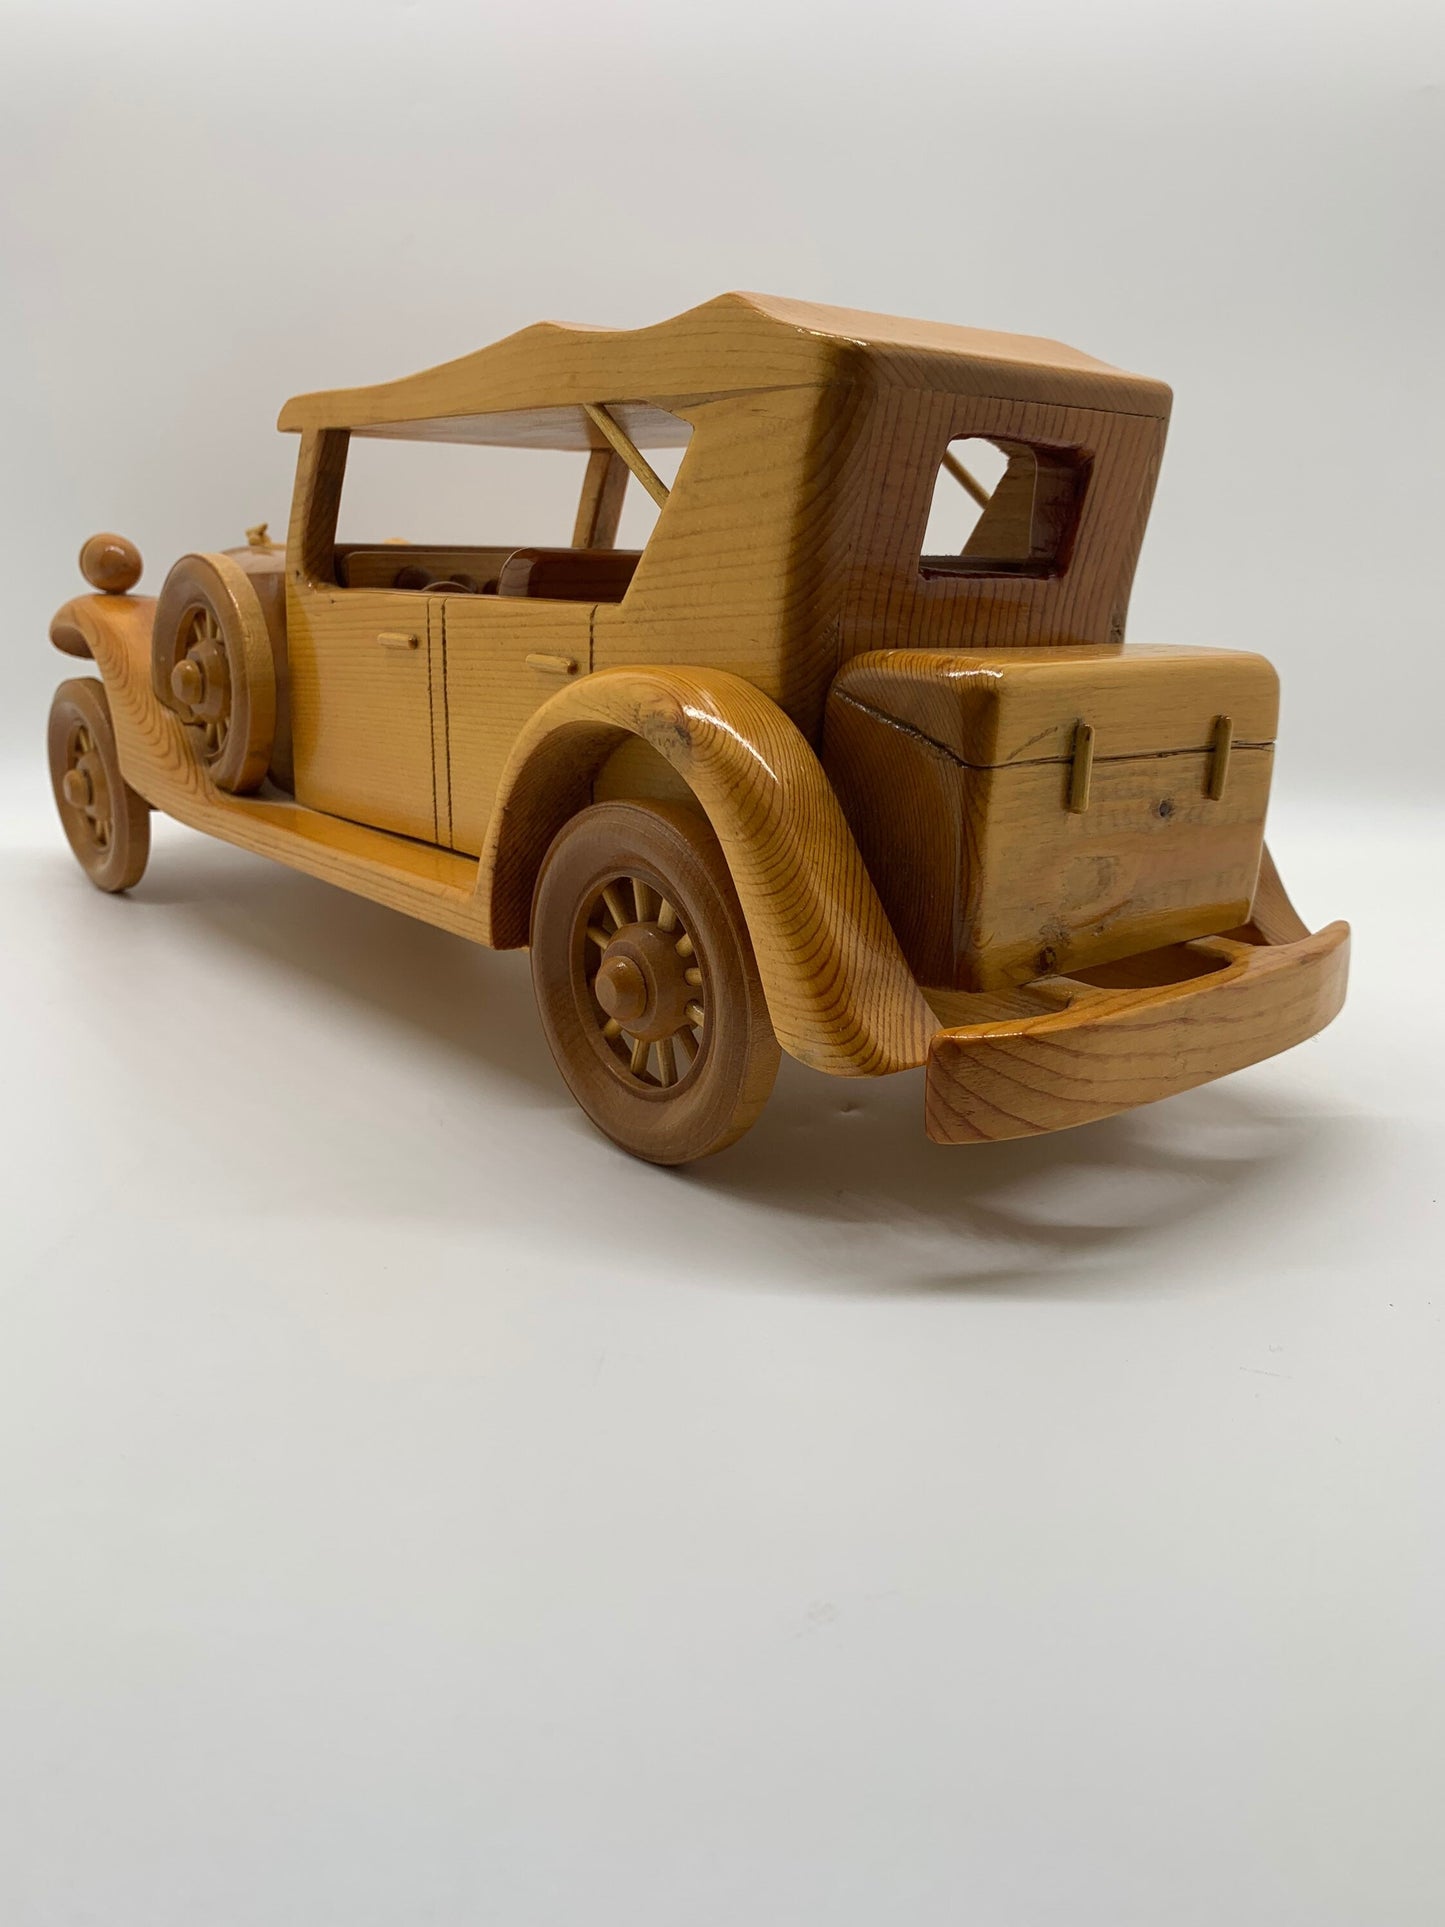 1929 Rolls Royce Phantom Wood Rare Collectable Vintage Scale Model LRC Wooden Classic Car